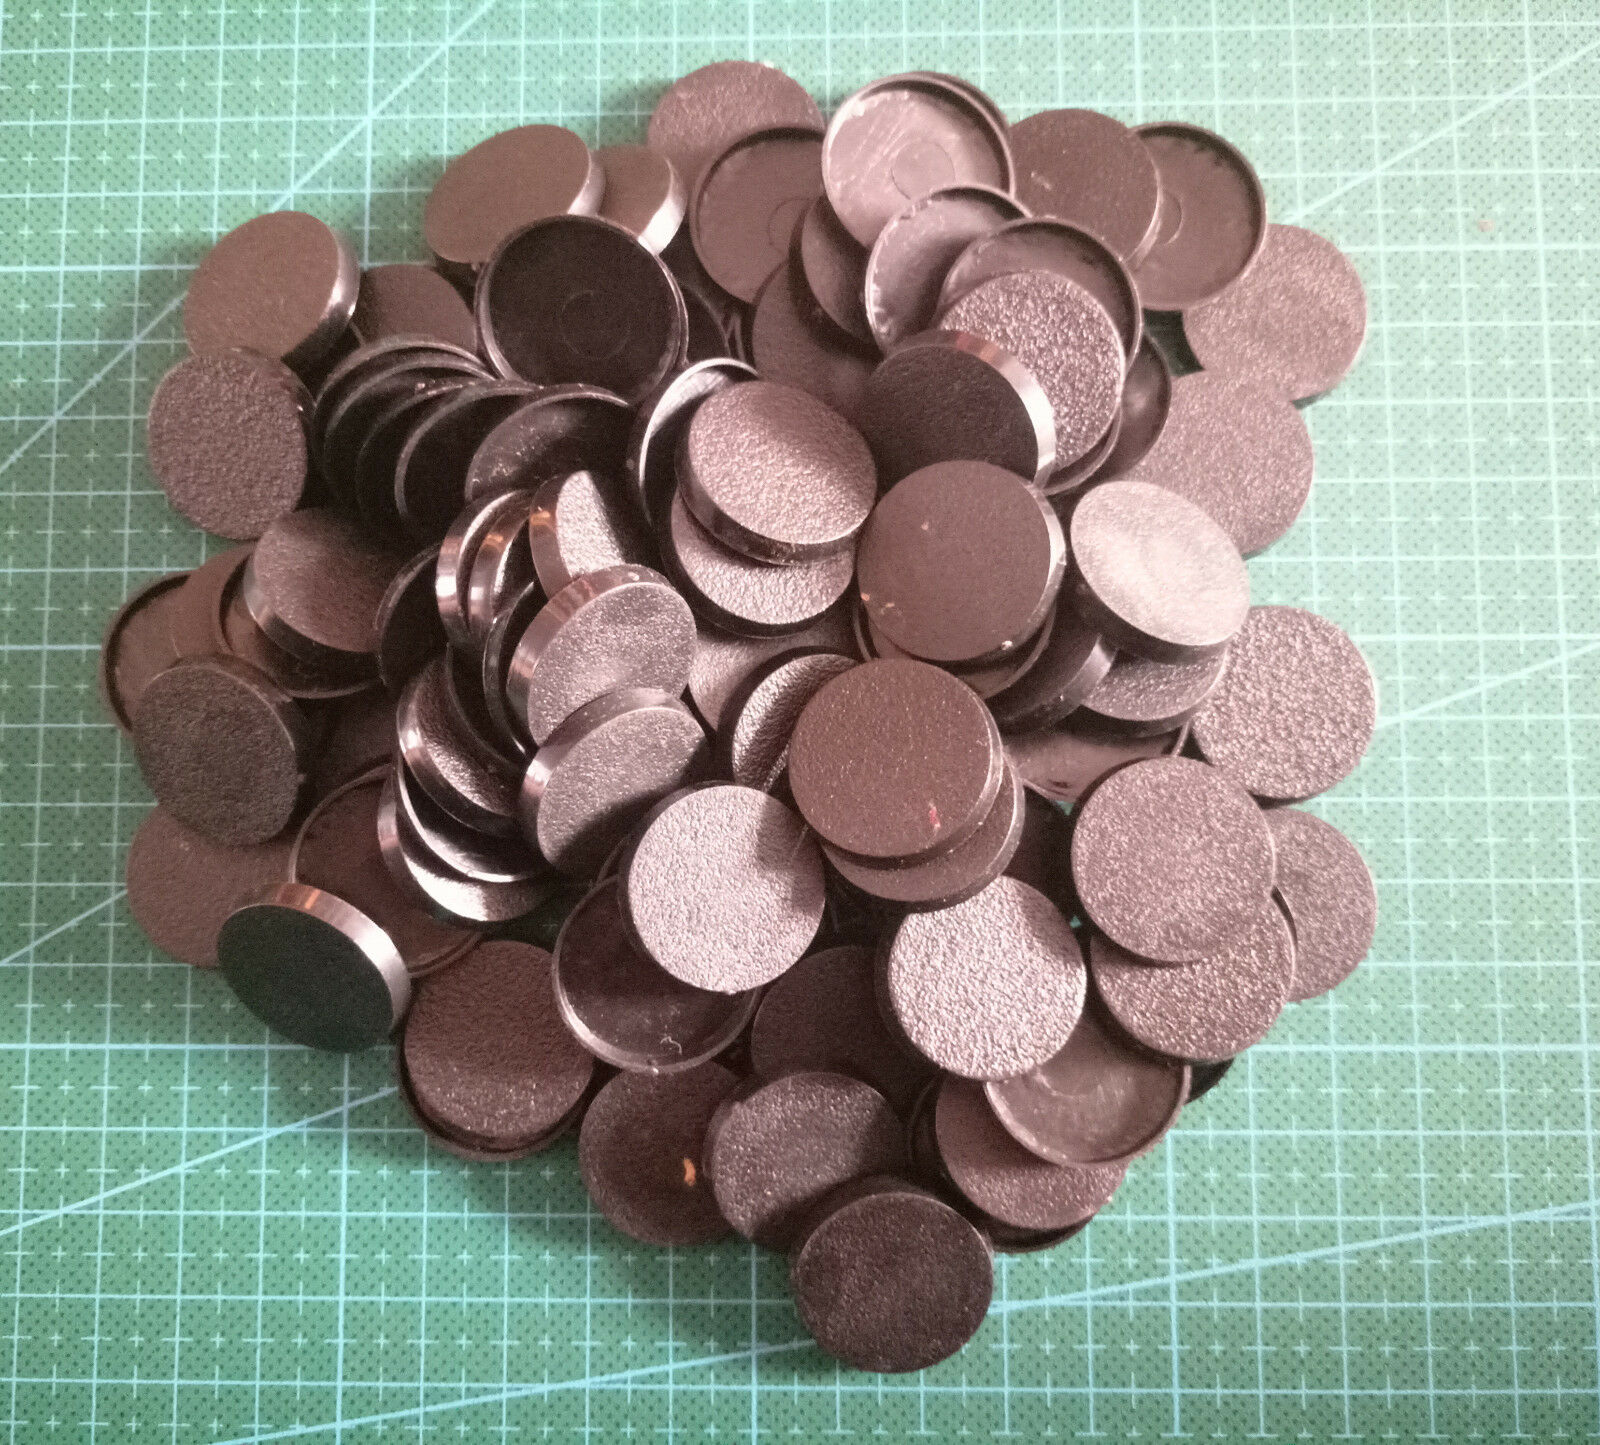 Lot-of-100-25mm-round-bases-for-wargames-table Games